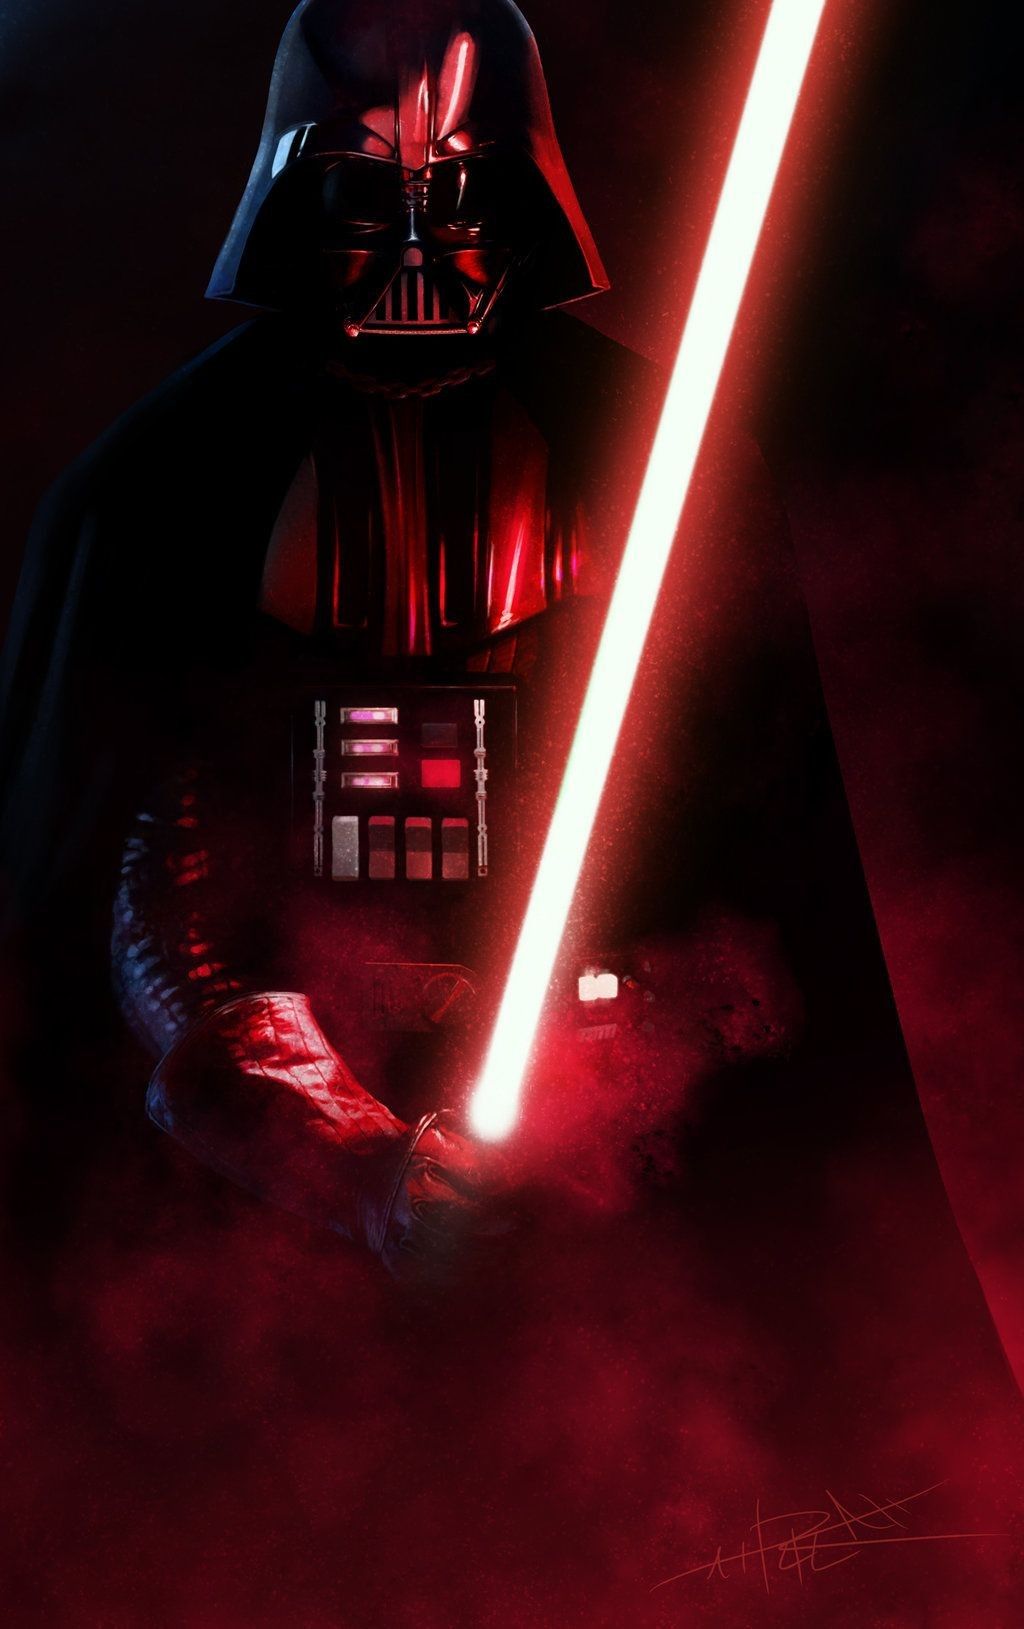 I Recently Made A Phone Wallpaper Album With Star Wars Theme If